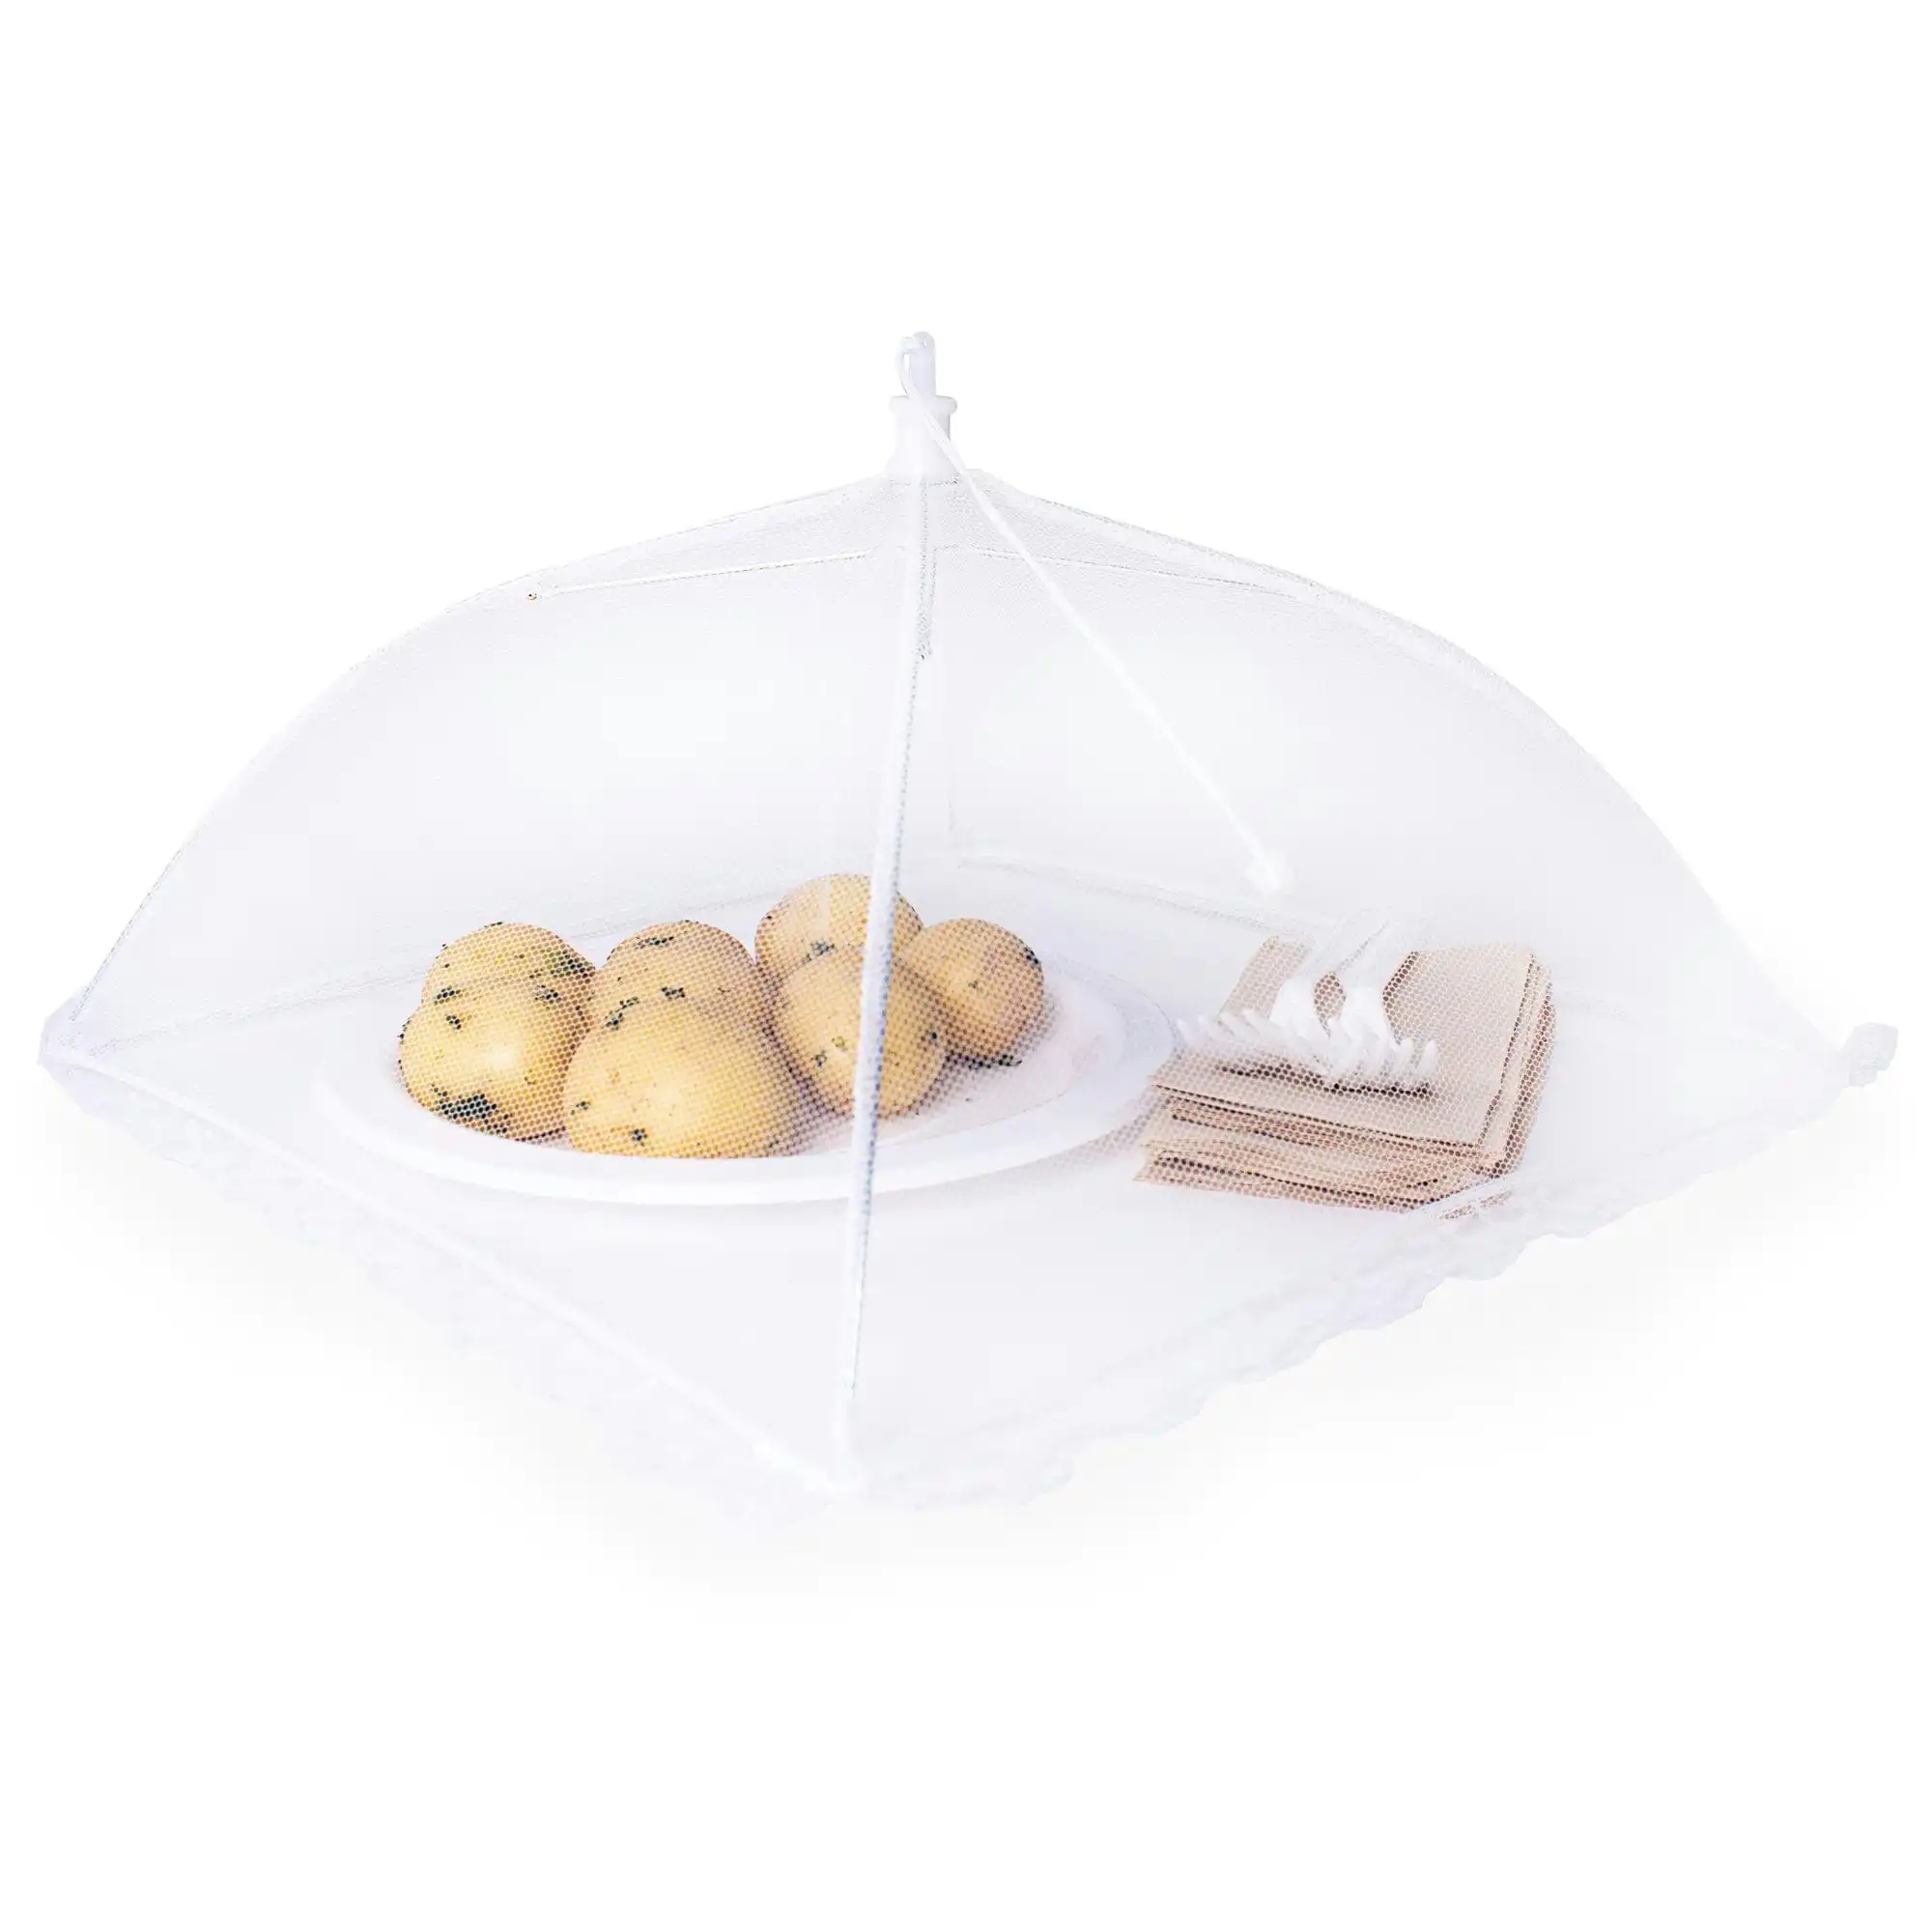 43cm Square Pop-up Mesh Food Cover